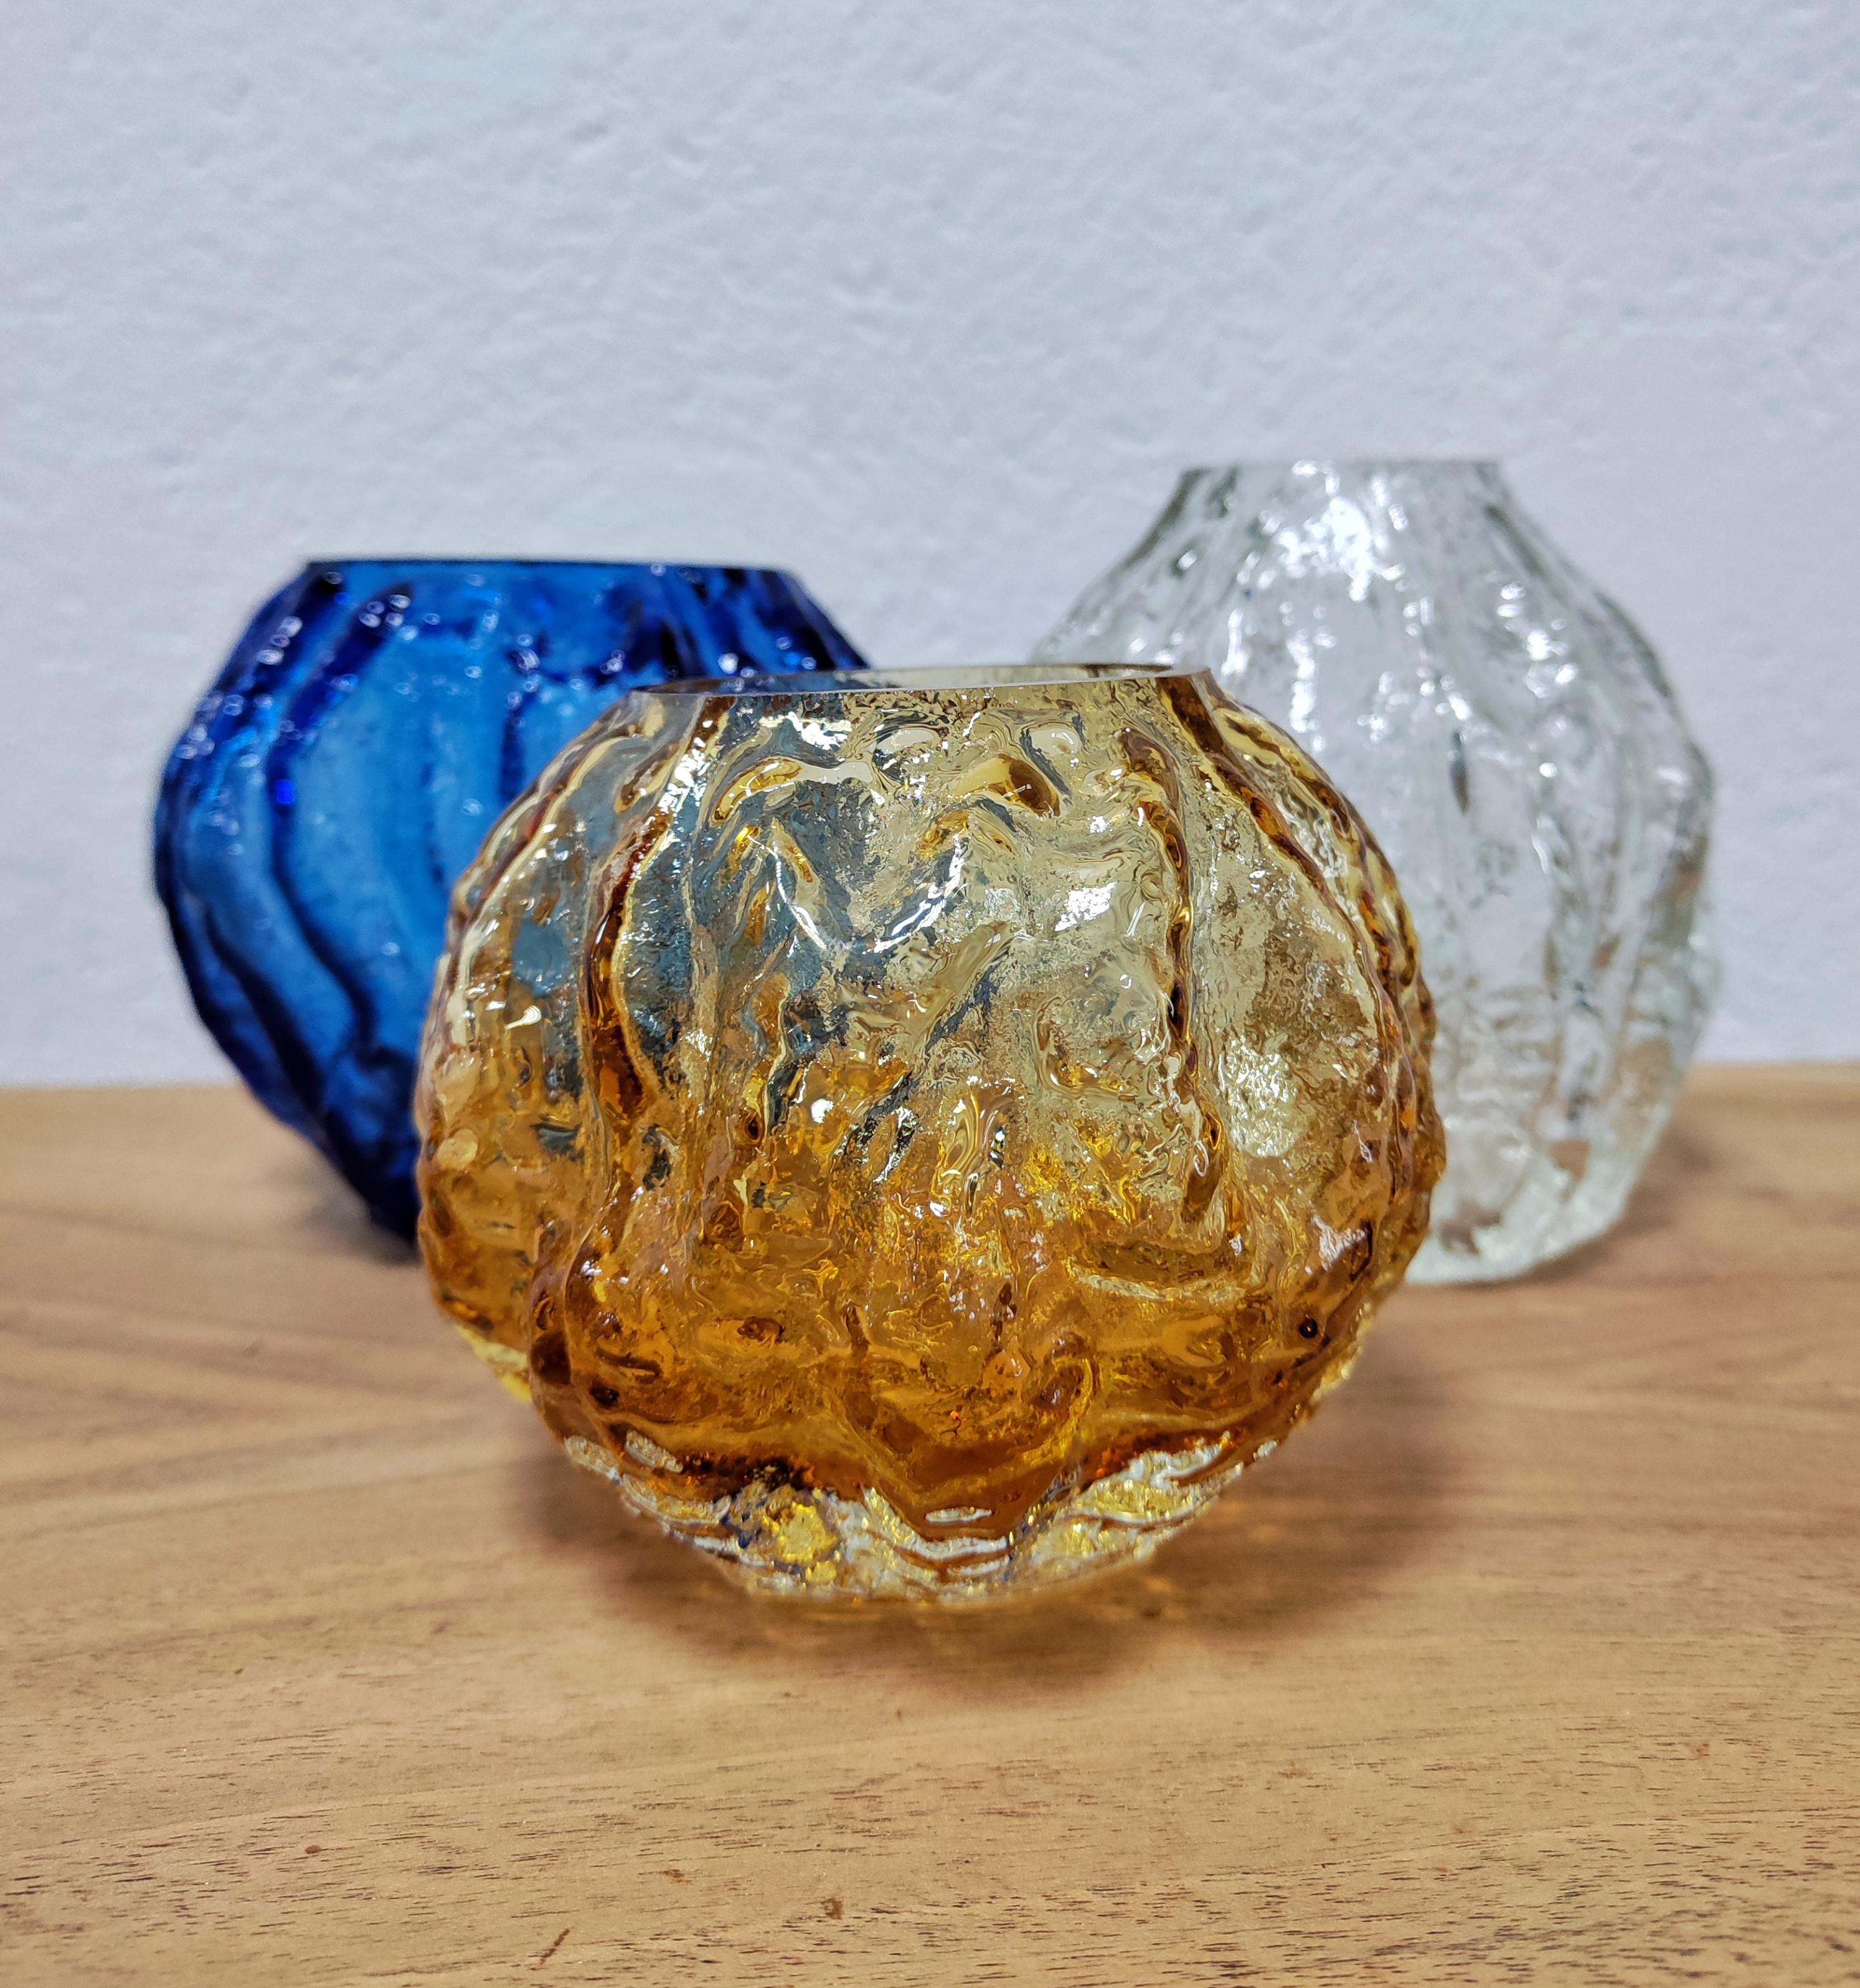 In this listing you may find a collection of 6 Mid-Century Modern glass vases in various sizes, shapes and colours. They were manufactured by Ingrid Glass, a renowned West German glass manufacturer. Each vase features tree bark texture and is made